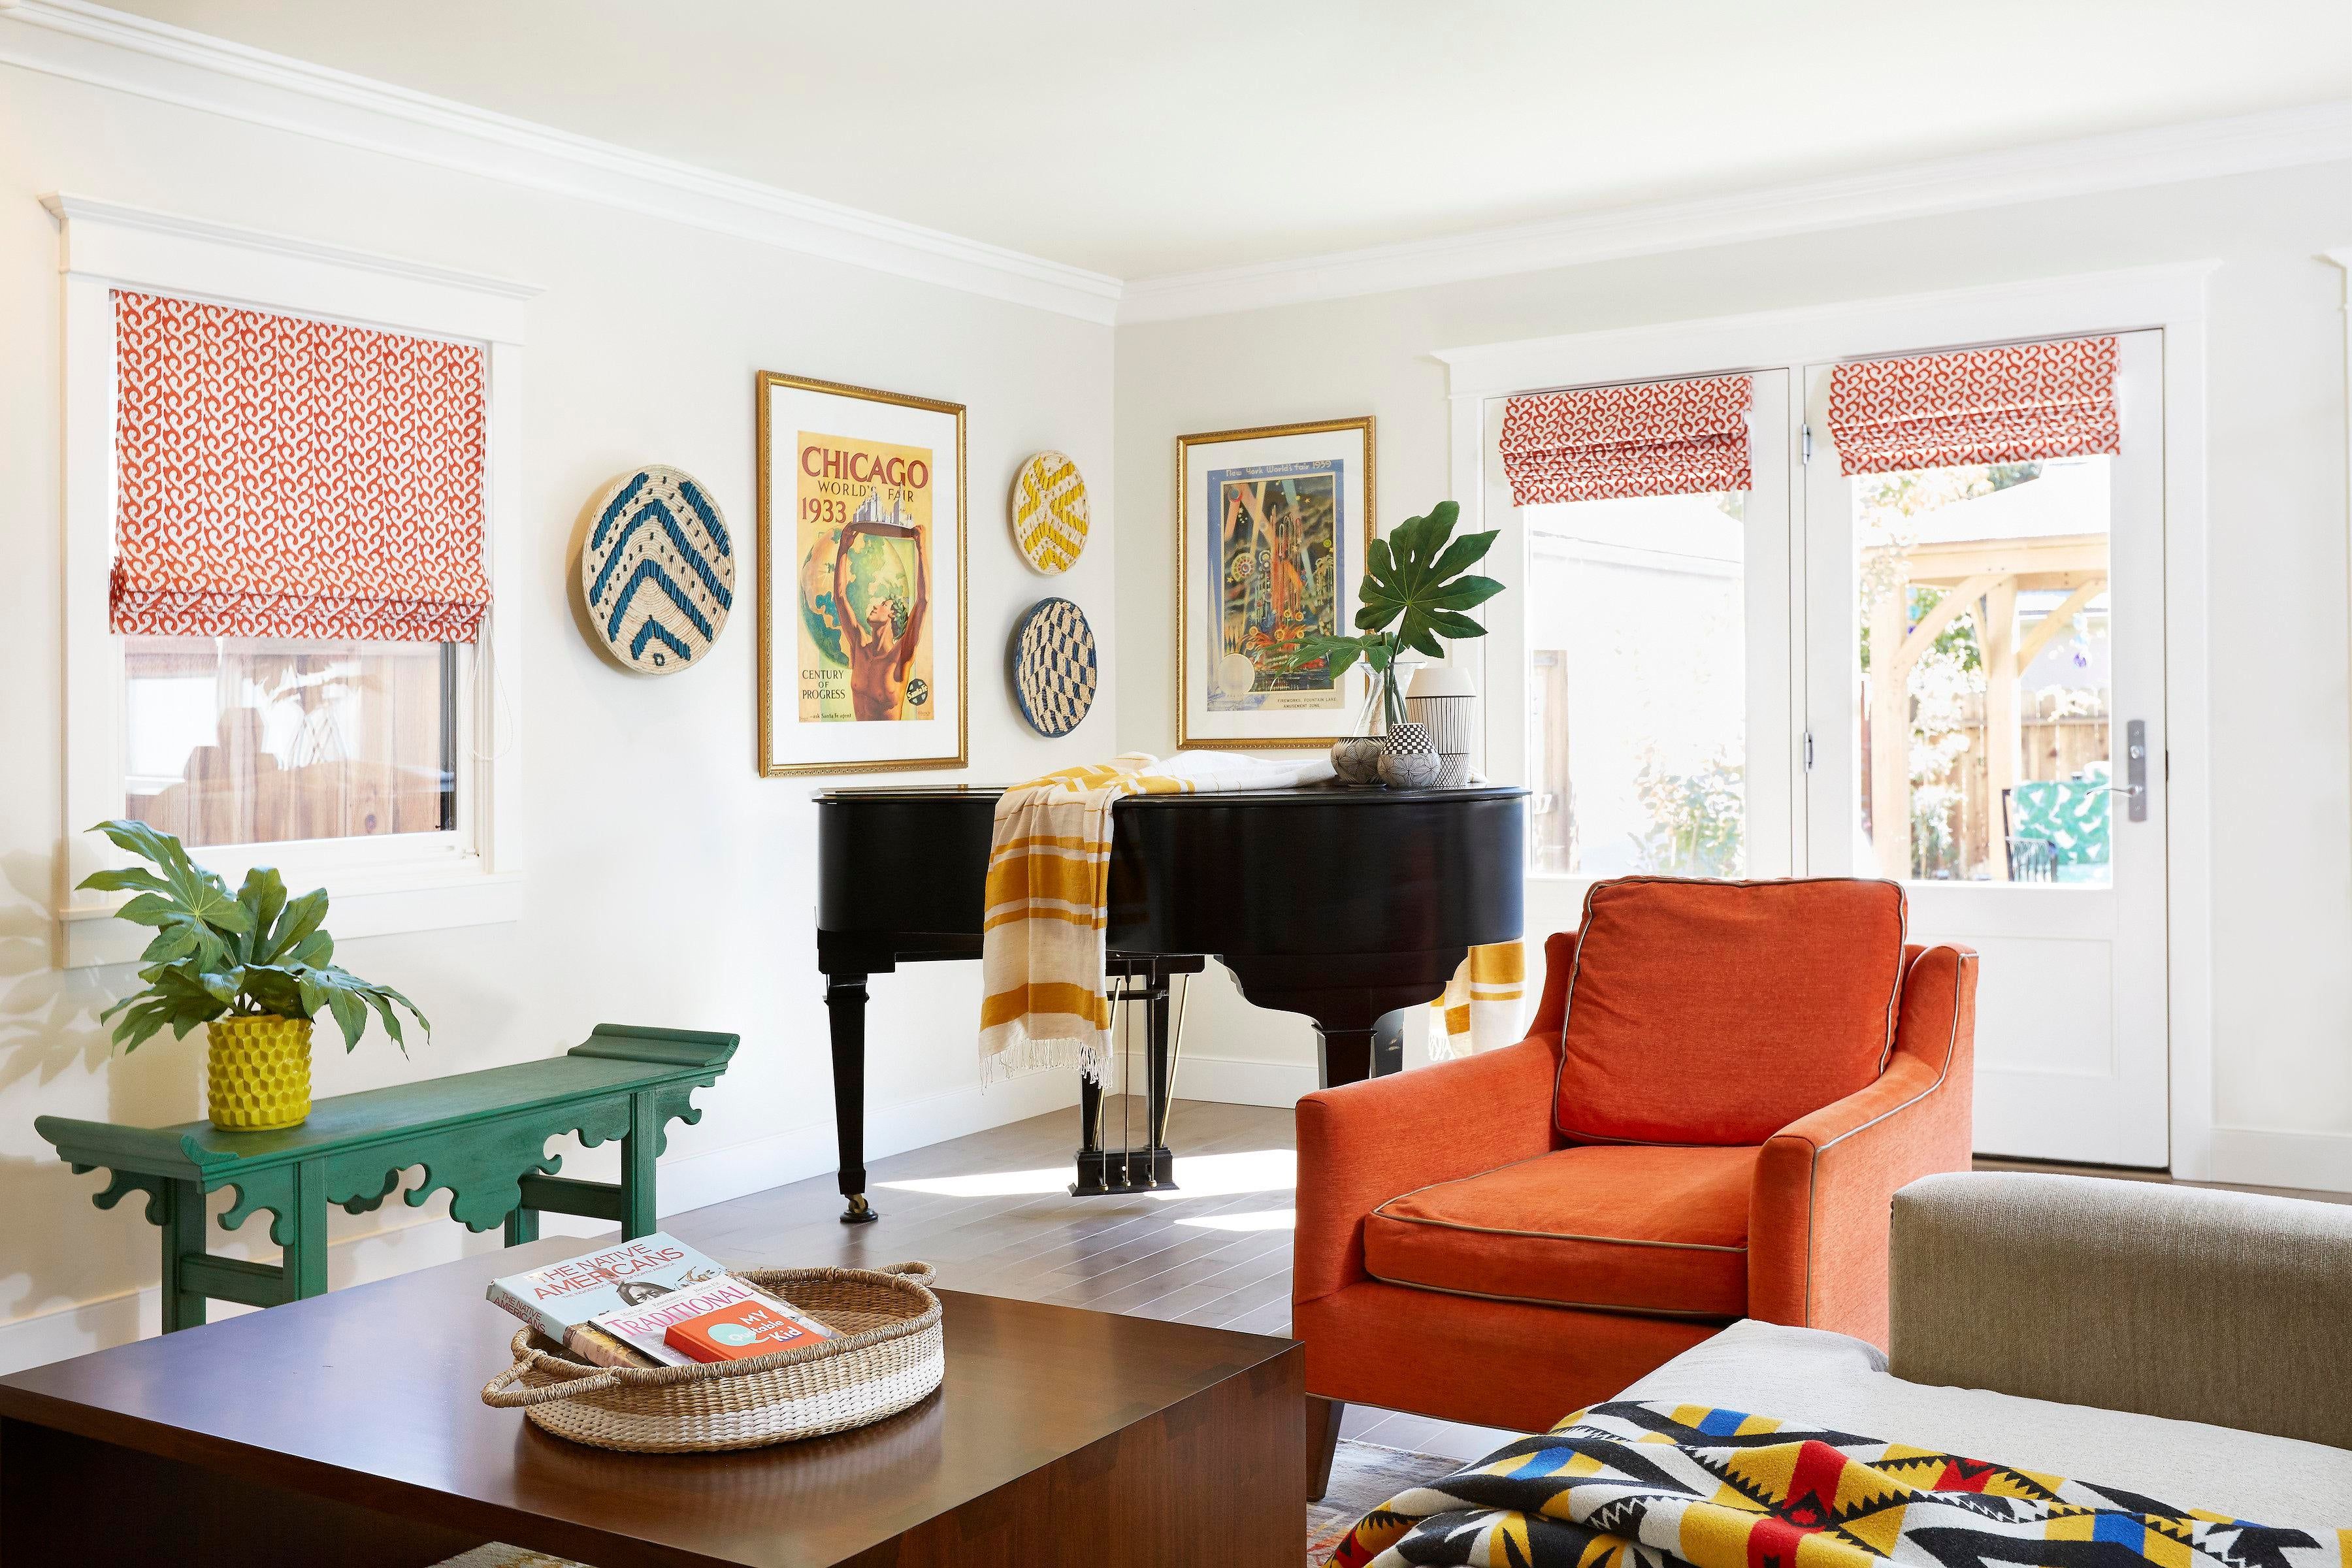 Before & After: Contemporary Design Style with Pops of Color